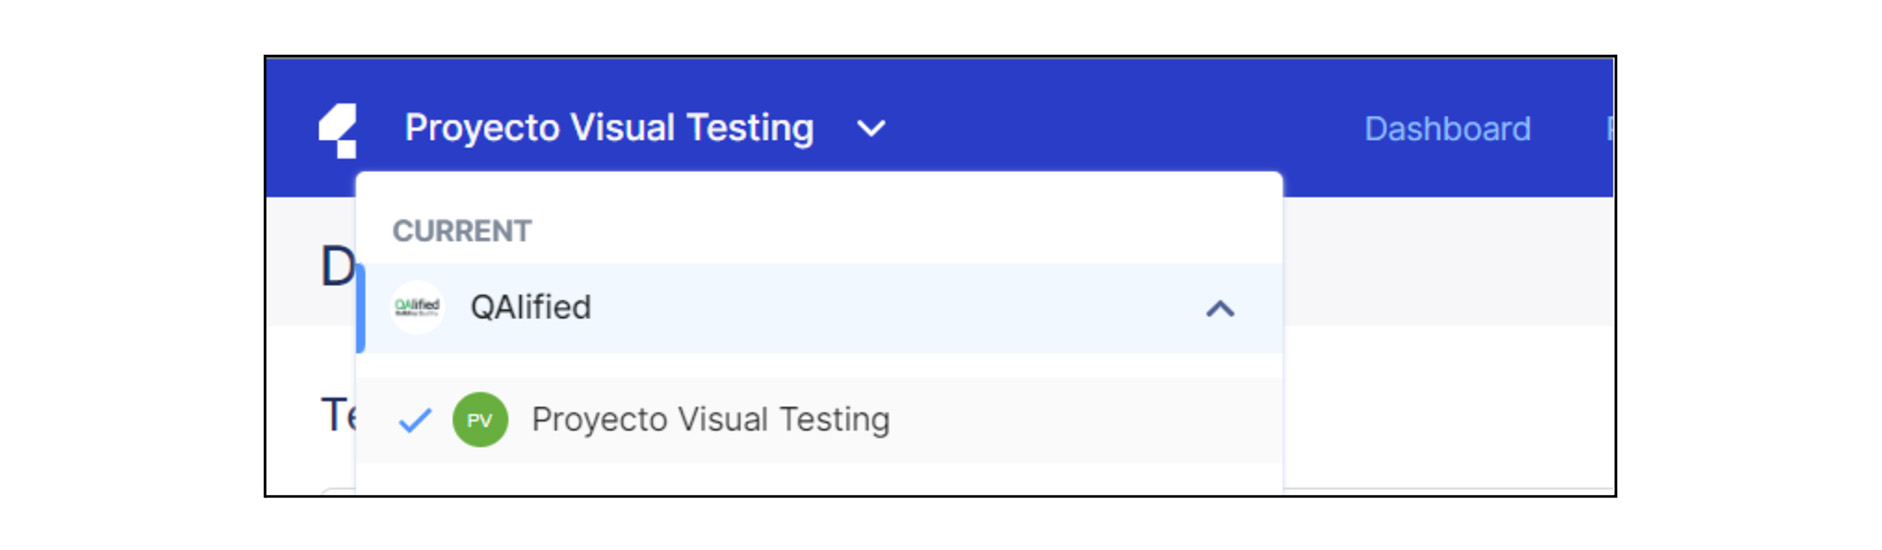 Project visual testing